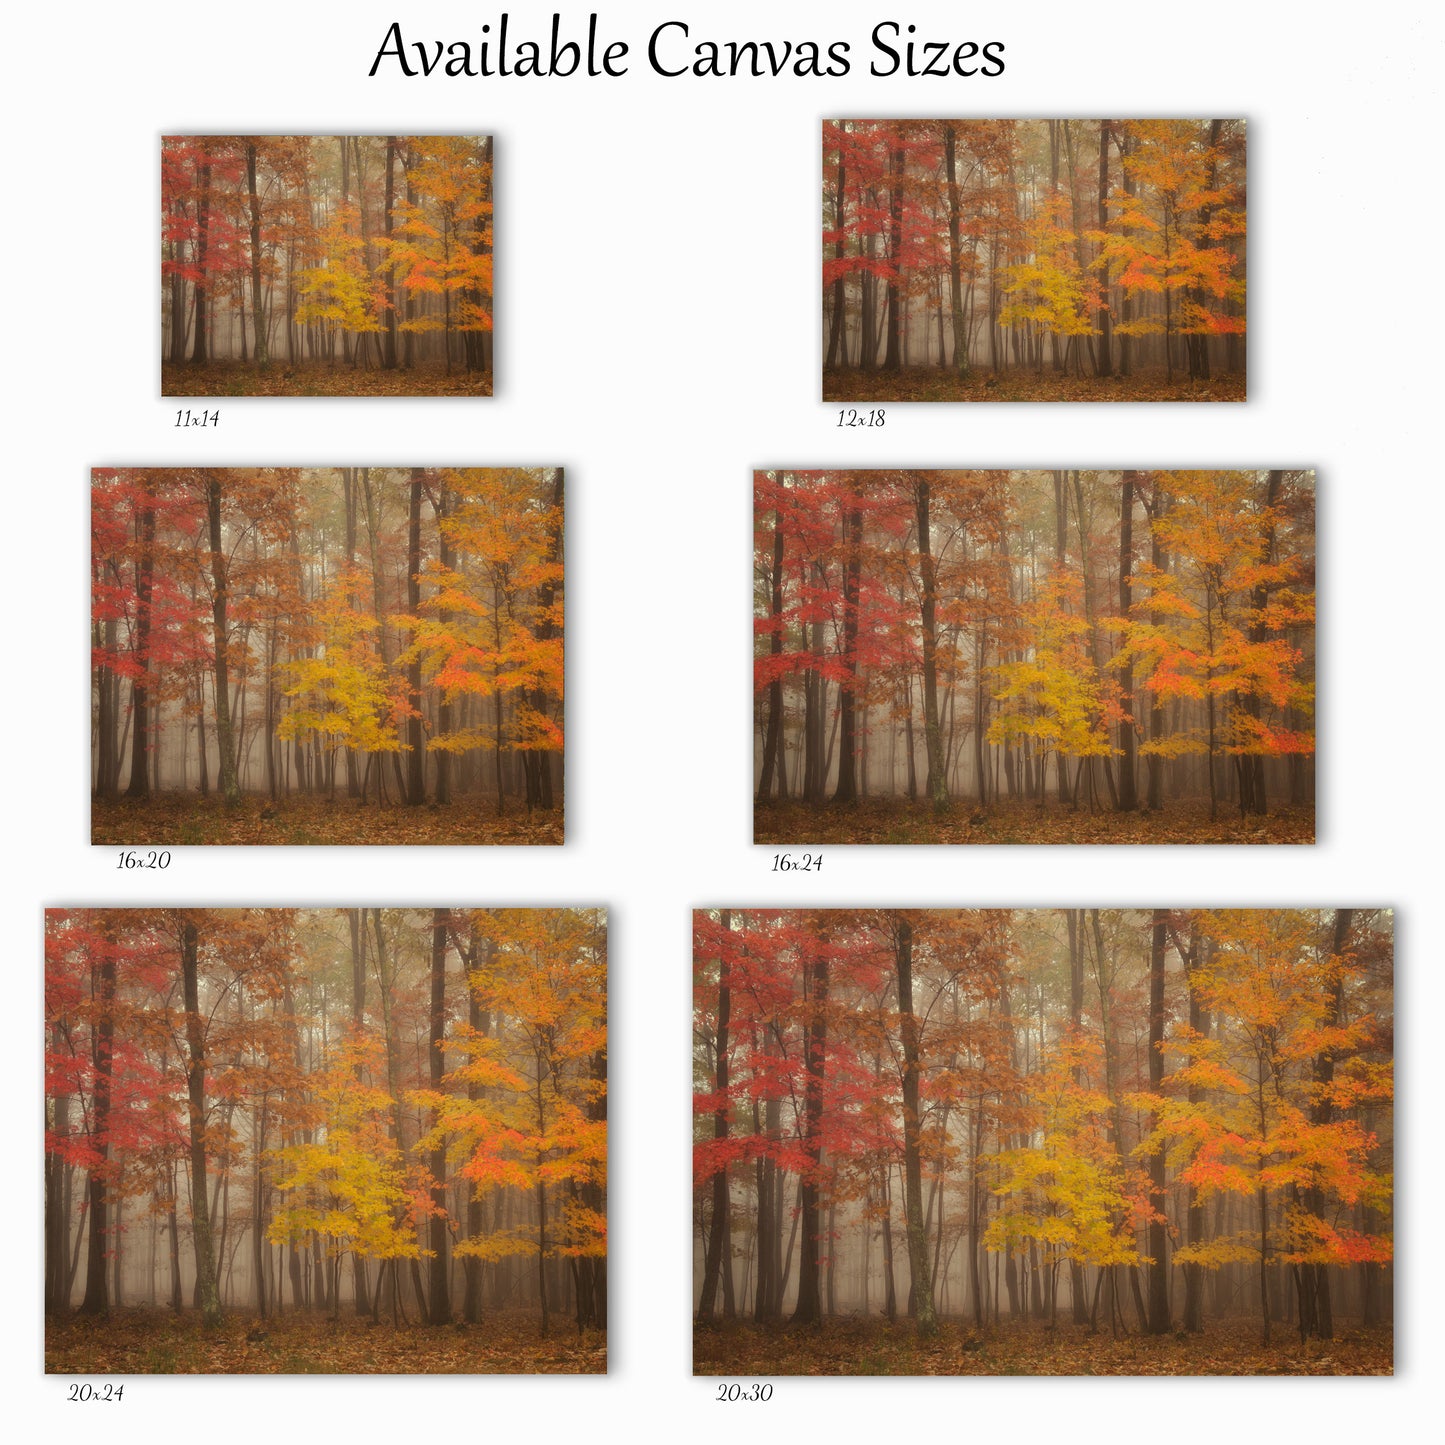 Visual representation of the canvas wall art print sizes available: 11x14, 12x18, 16x20, 16x24, 20x24 and 20x30.